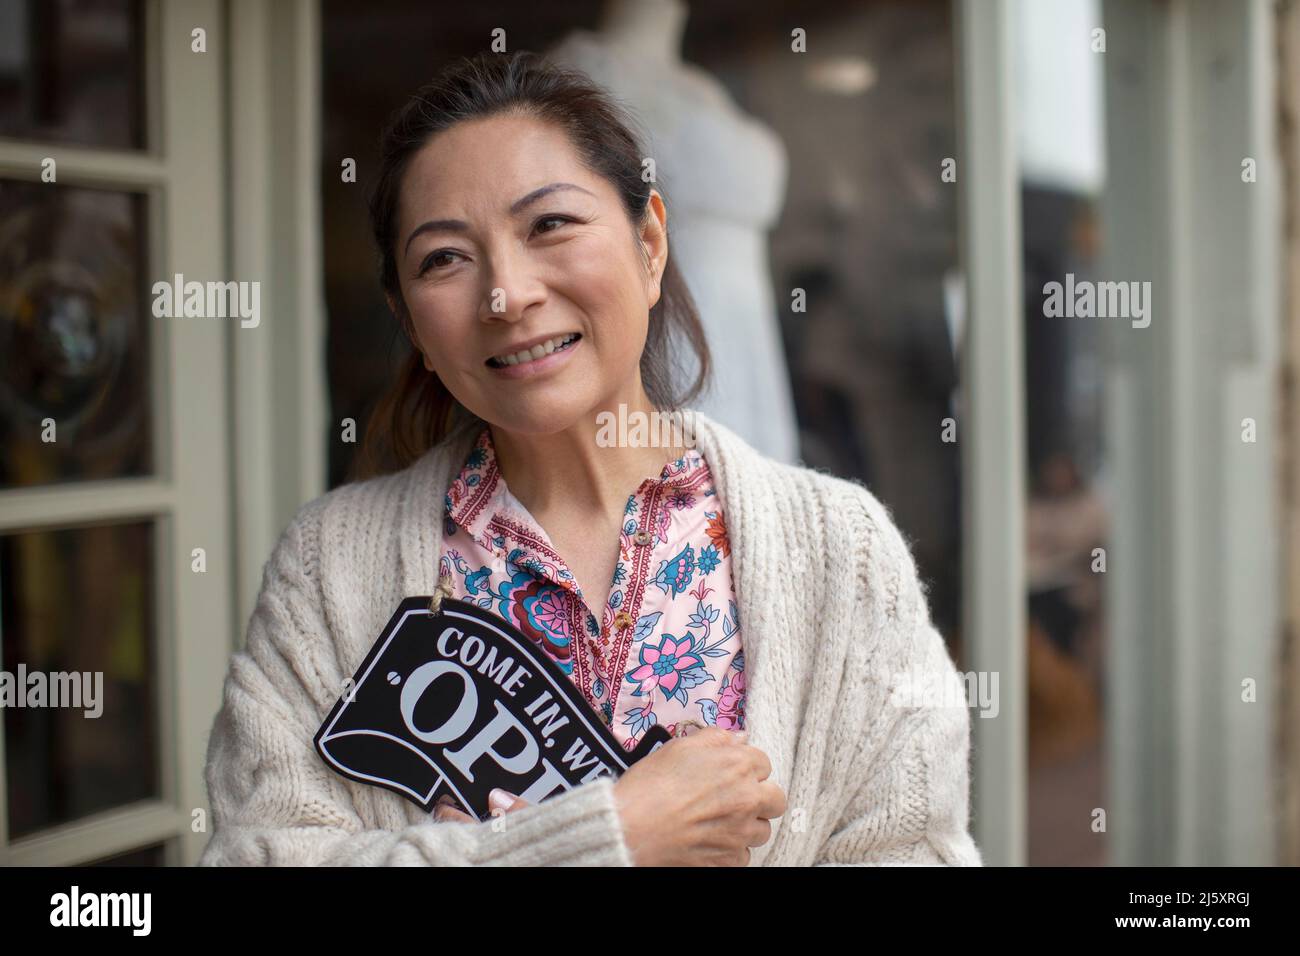 Smiling female shop owner holding open sign Stock Photo